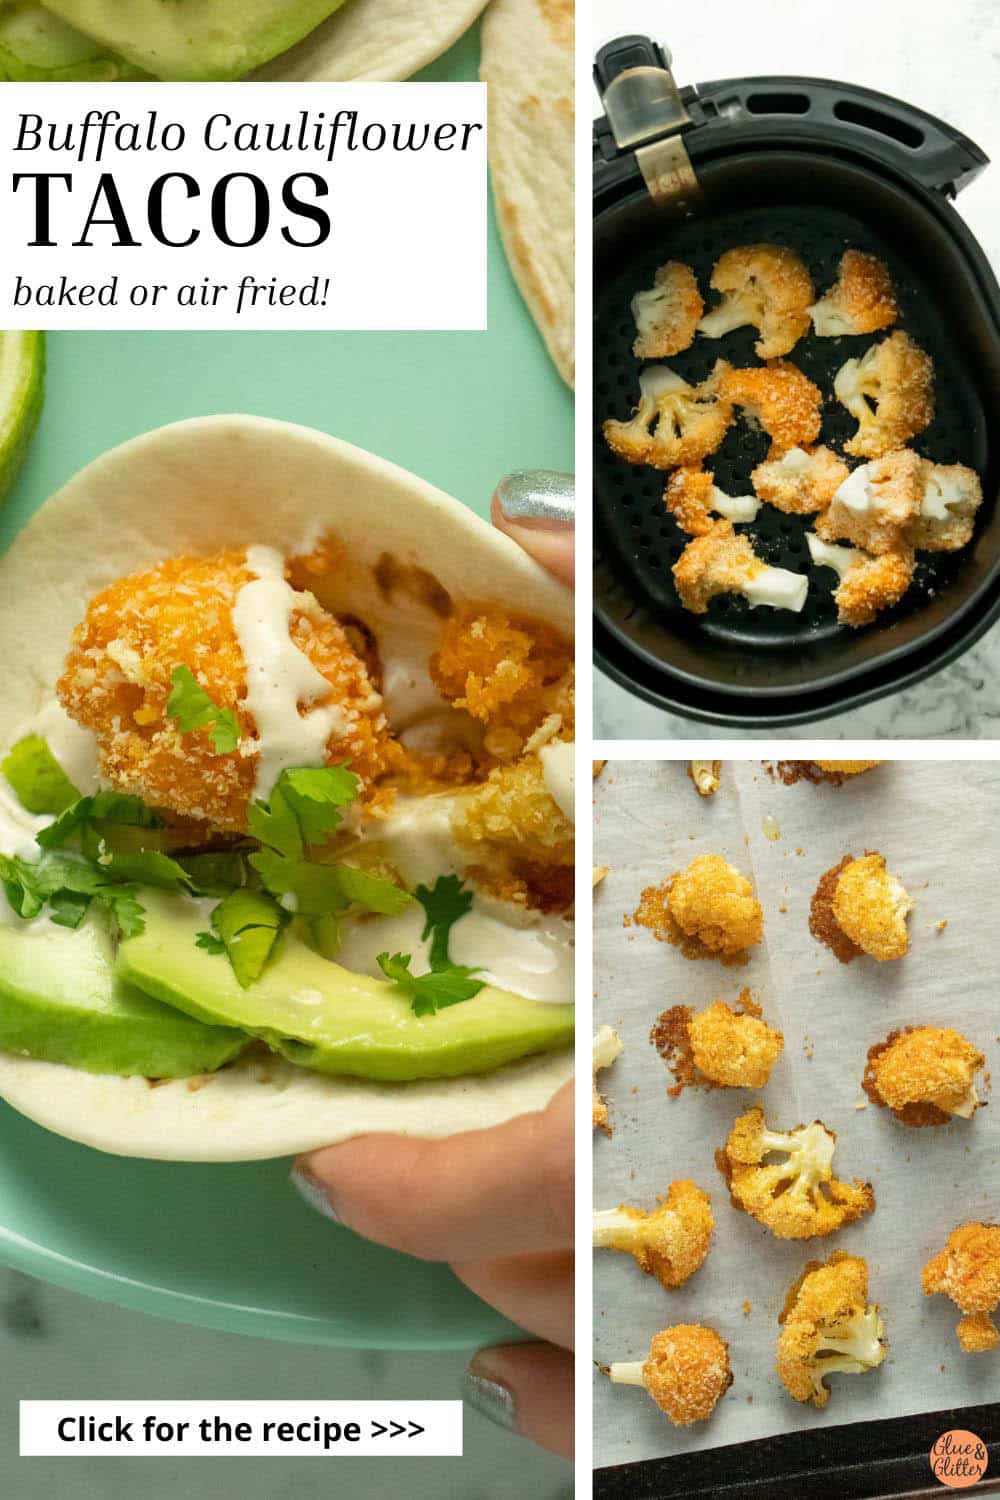 image collage showing a buffalo cauliflower taco and pictures of the cauliflower in the air fryer and on the baking sheet, text overlay